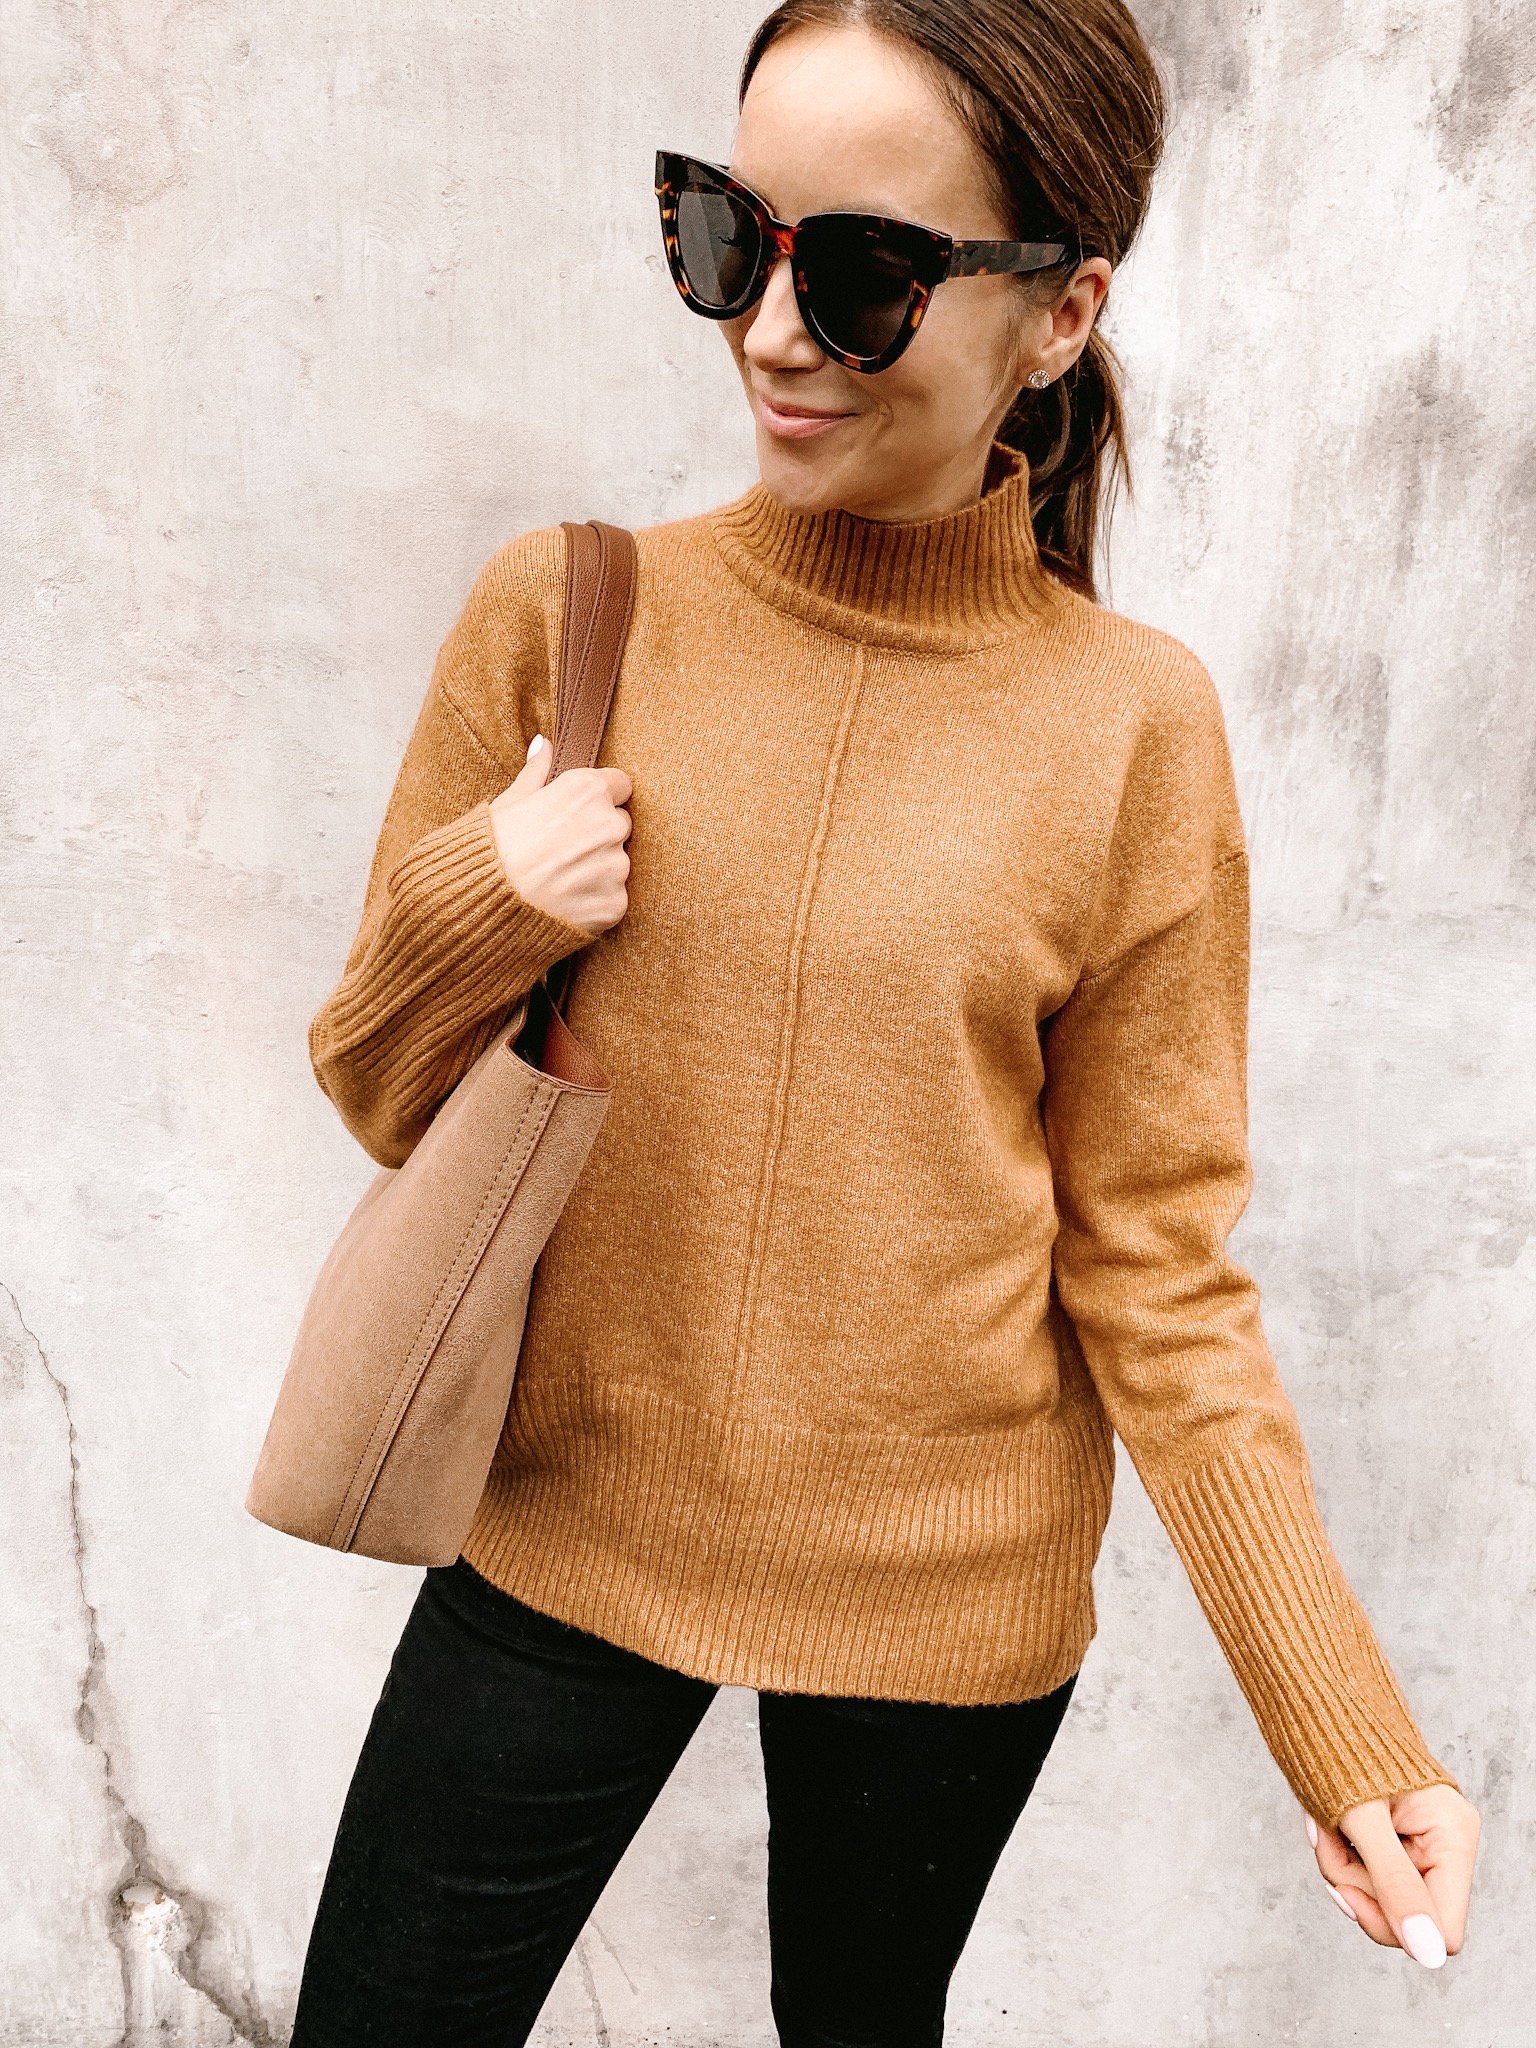 SWEATER, JEGGINGS, TOTE